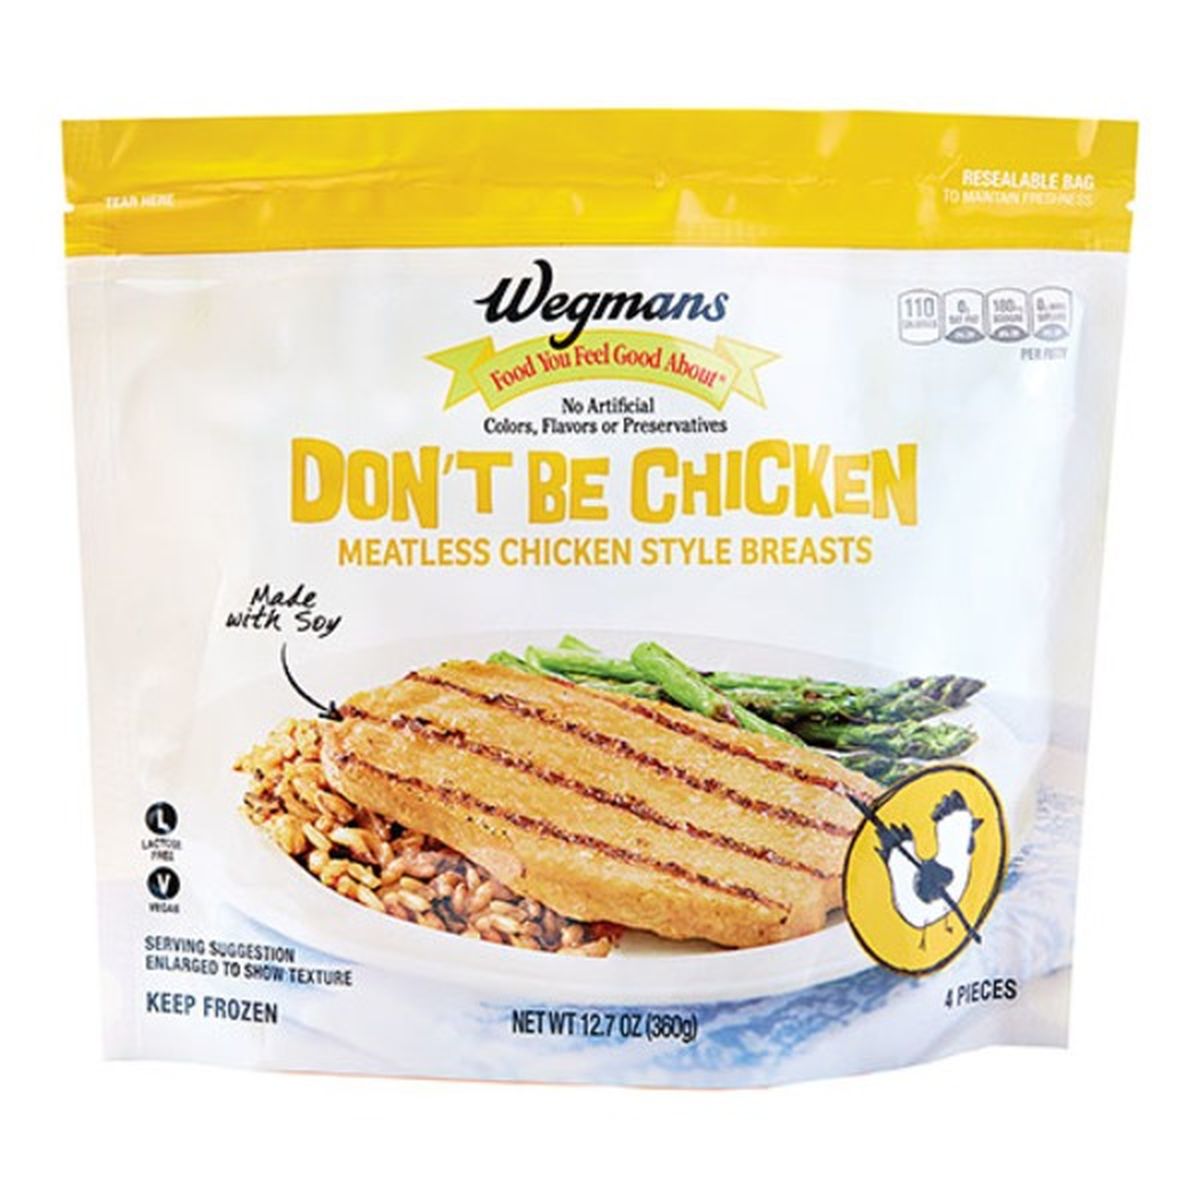 Calories in Wegmans Don't Be Chicken Meatless Chicken Style Breasts